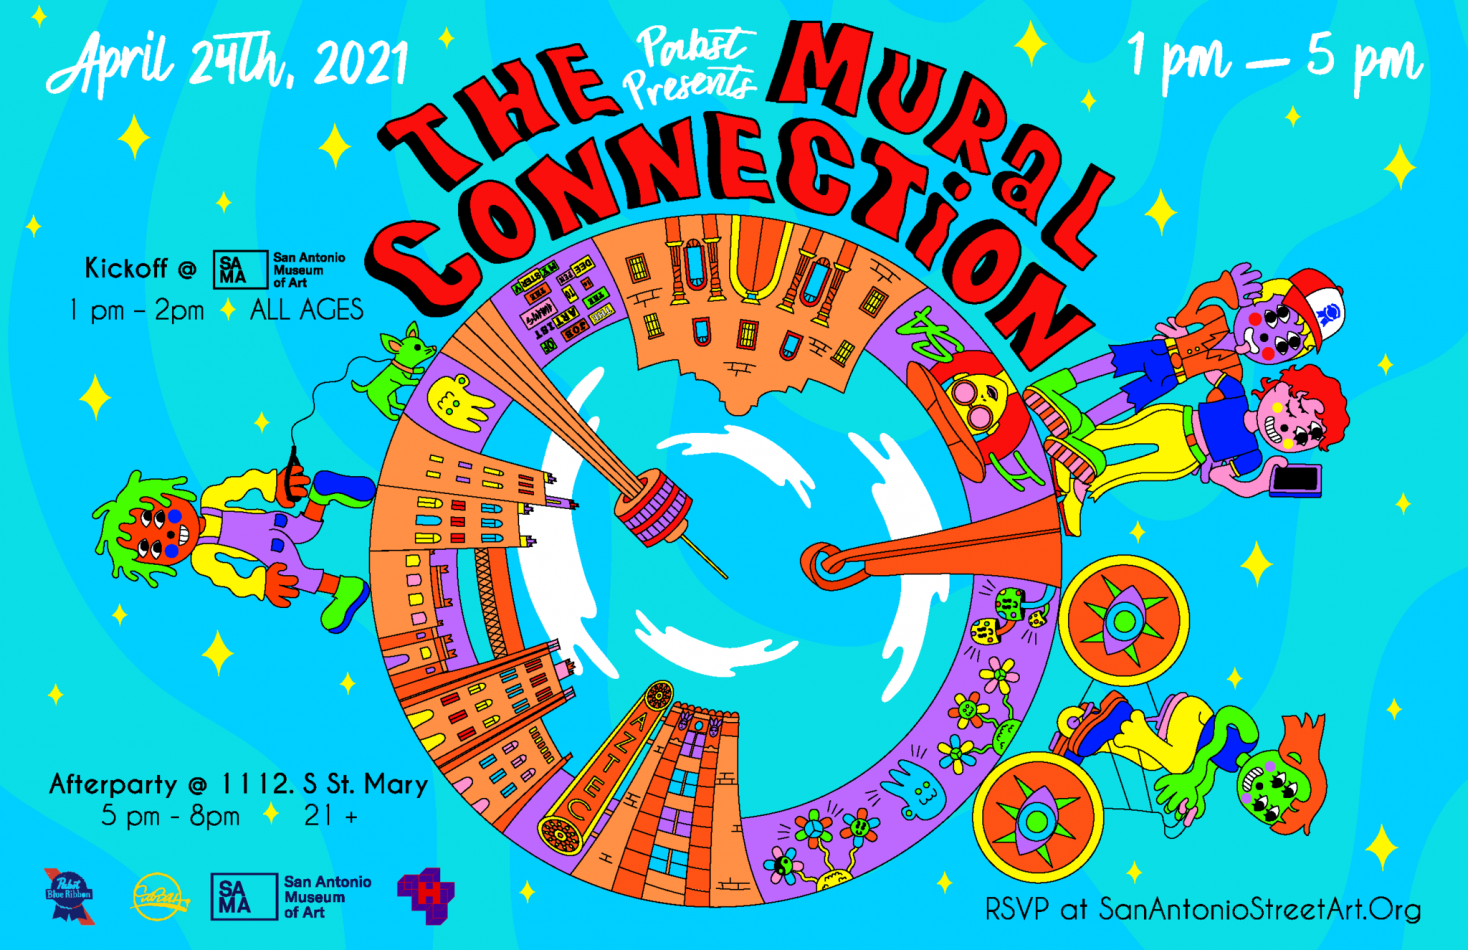 Gallery 1 - Pabst Blue Ribbon Presents “The Mural Connection,” a One-Day Art Walk Through Downtown